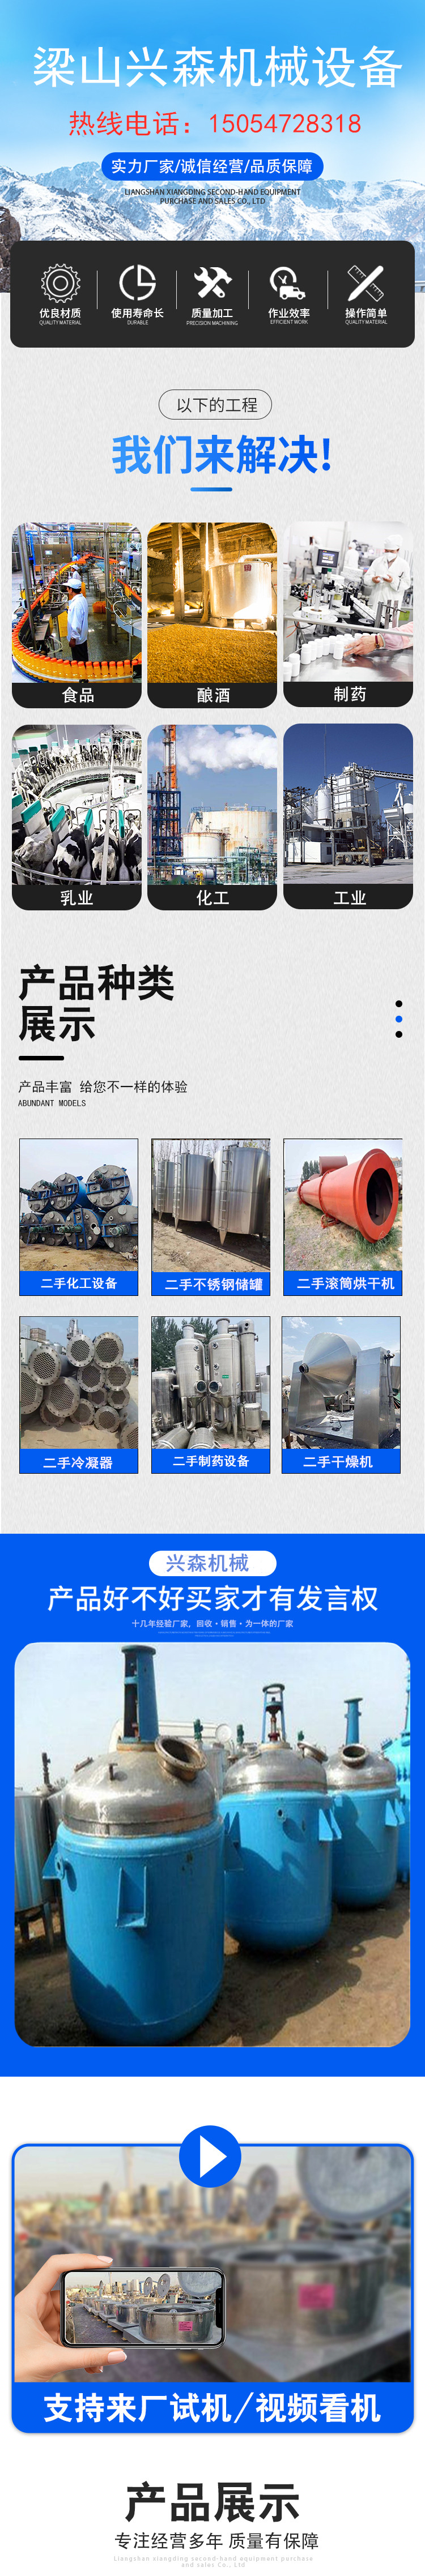 Used microwave dryer Large tunnel microwave dryer Water cooled air cooled microwave sterilizer